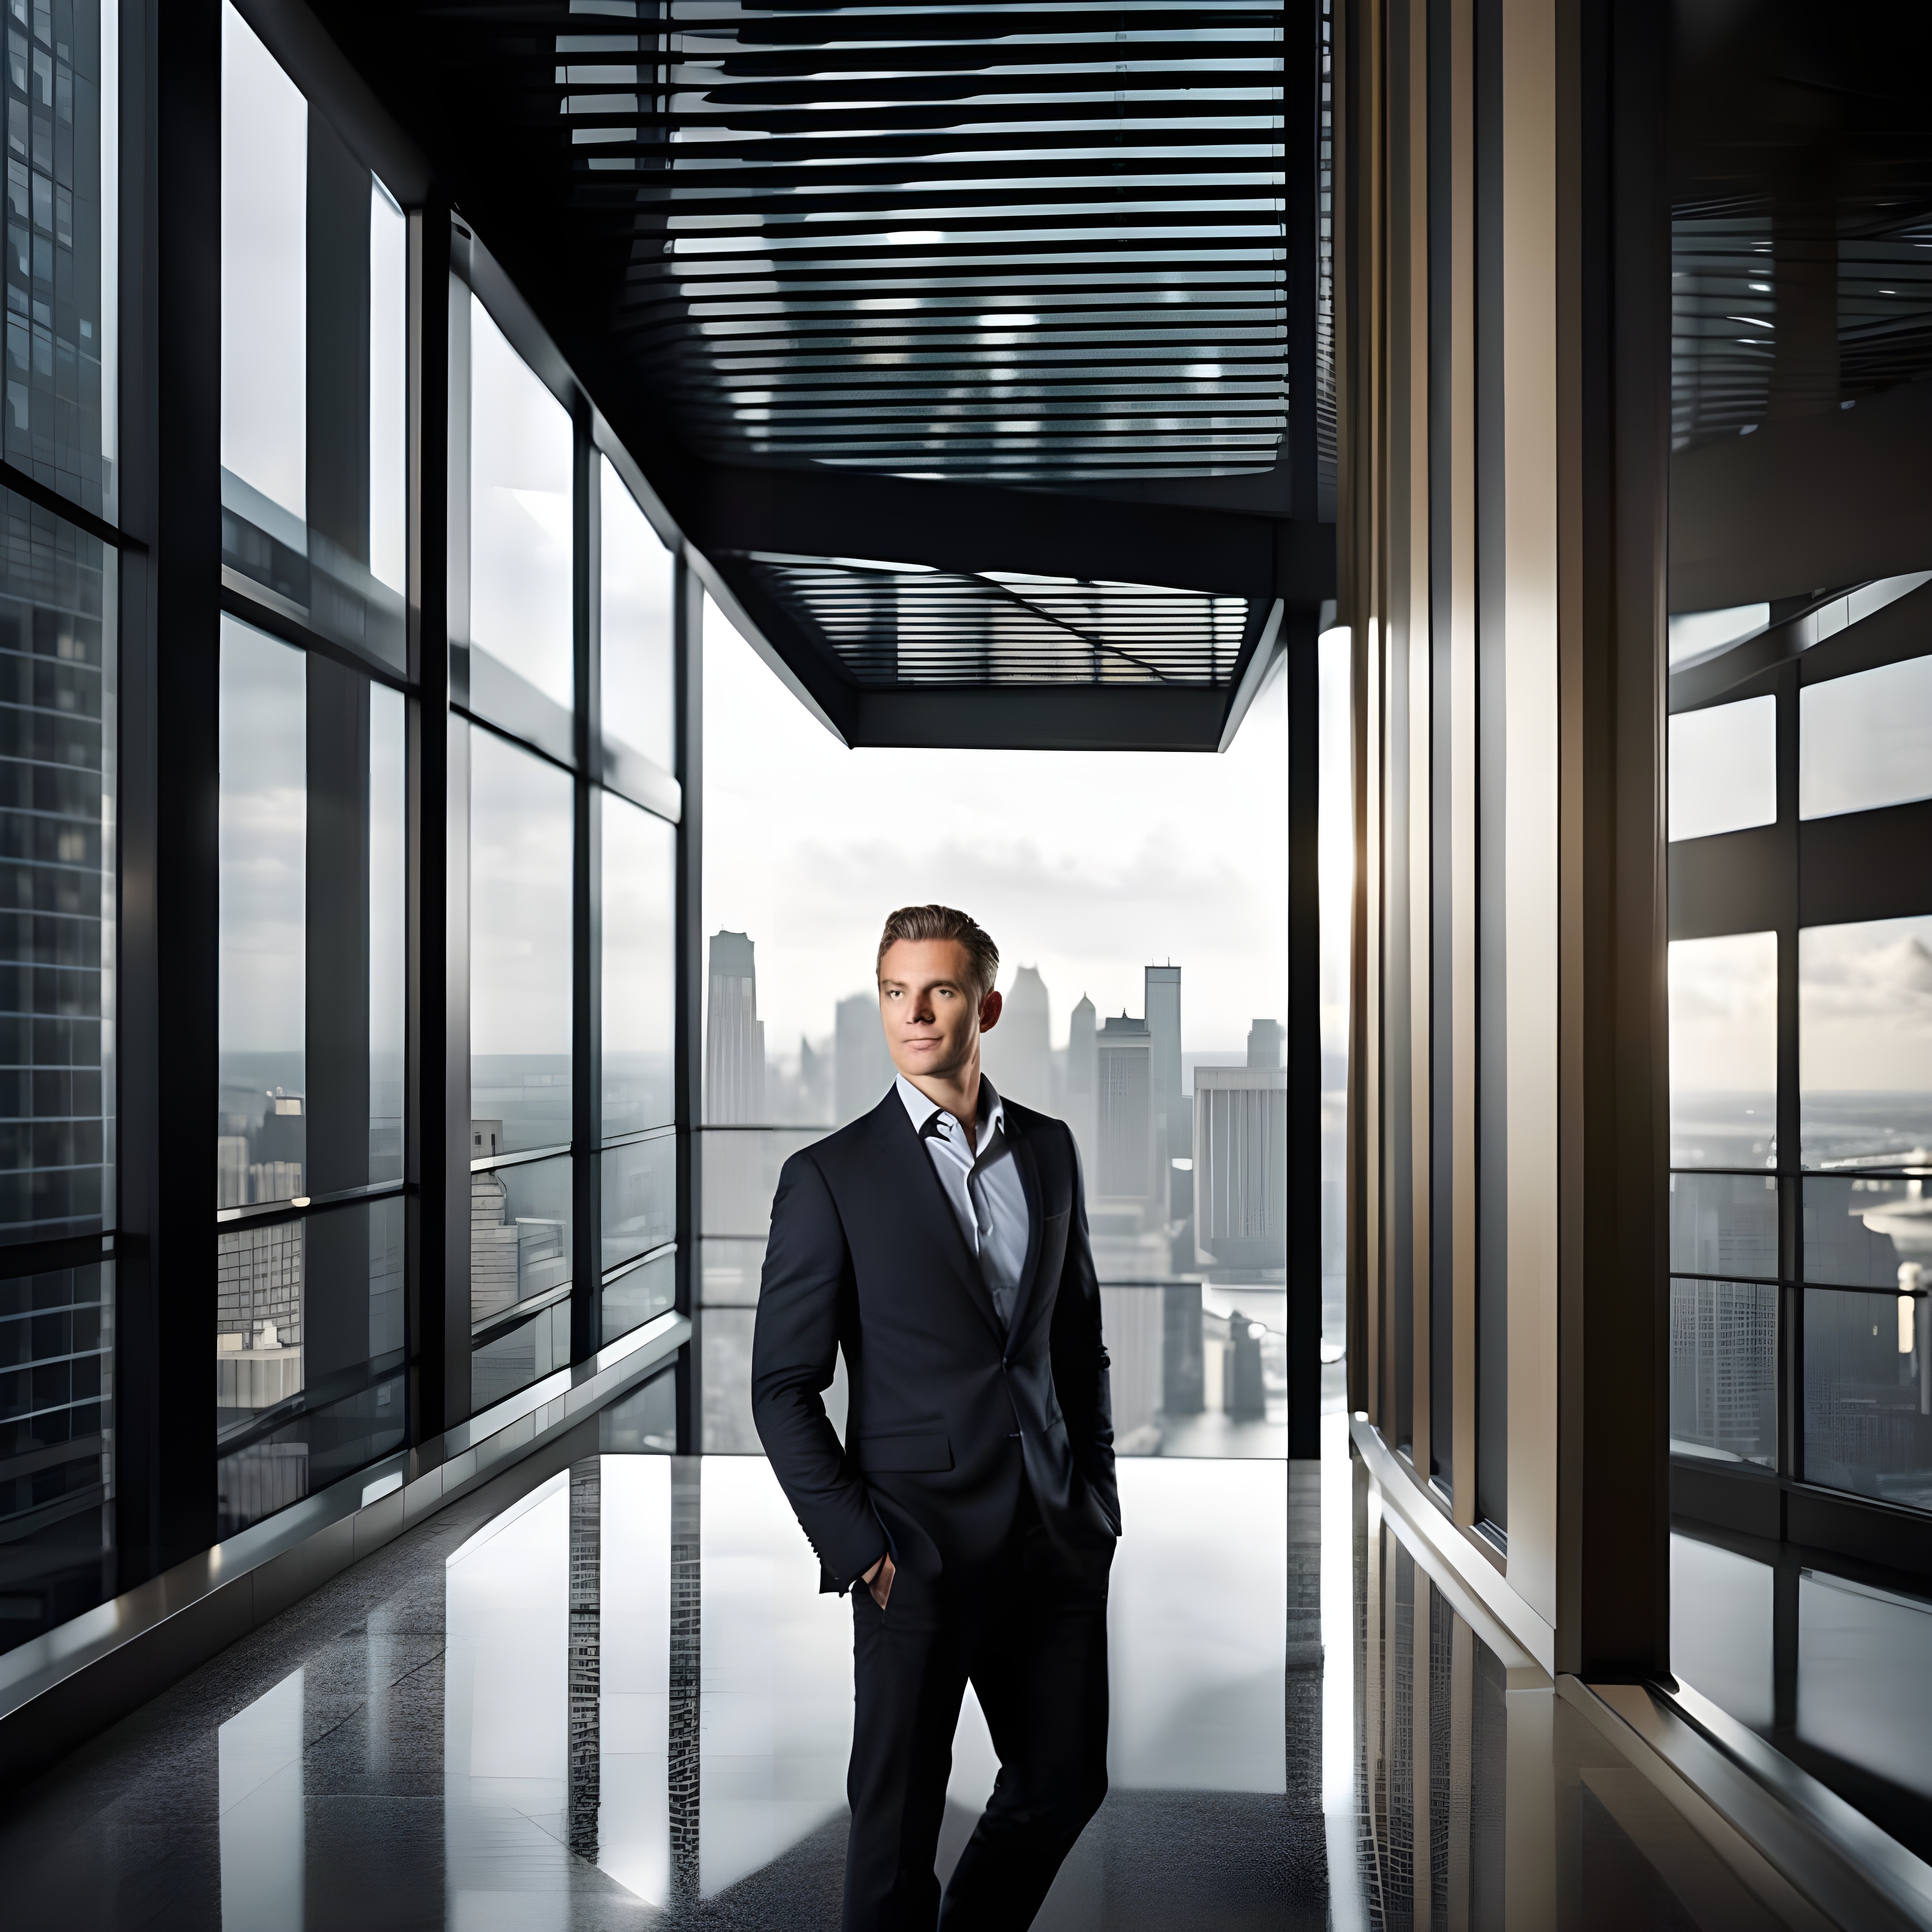 a man in a suit standing in a hallway with a city view behind him